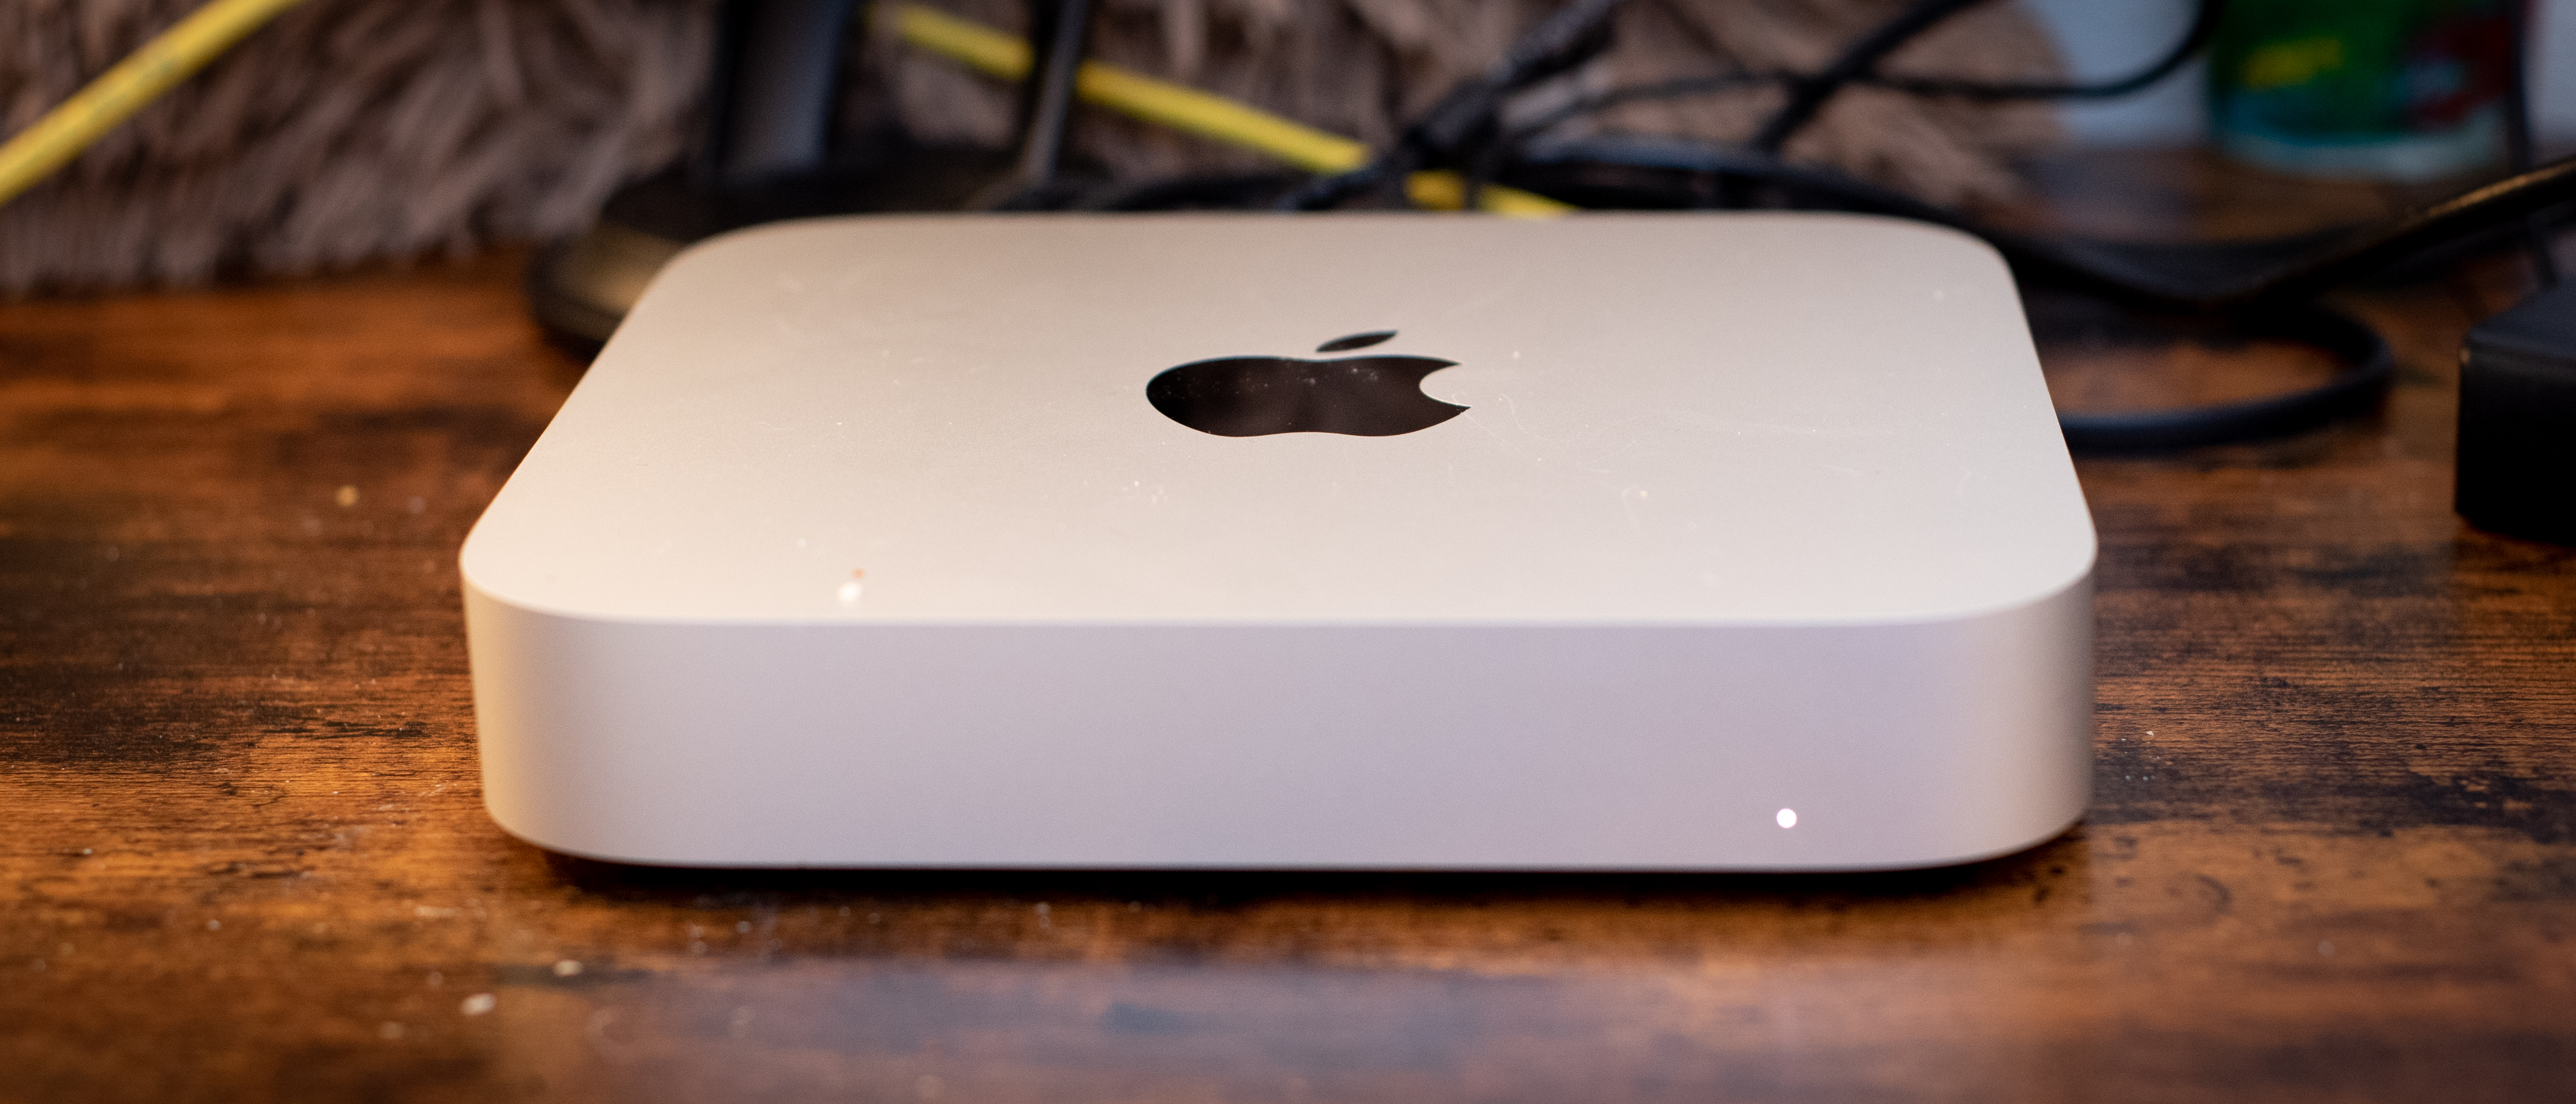 I used to laugh at the Mac Mini but today I bought one